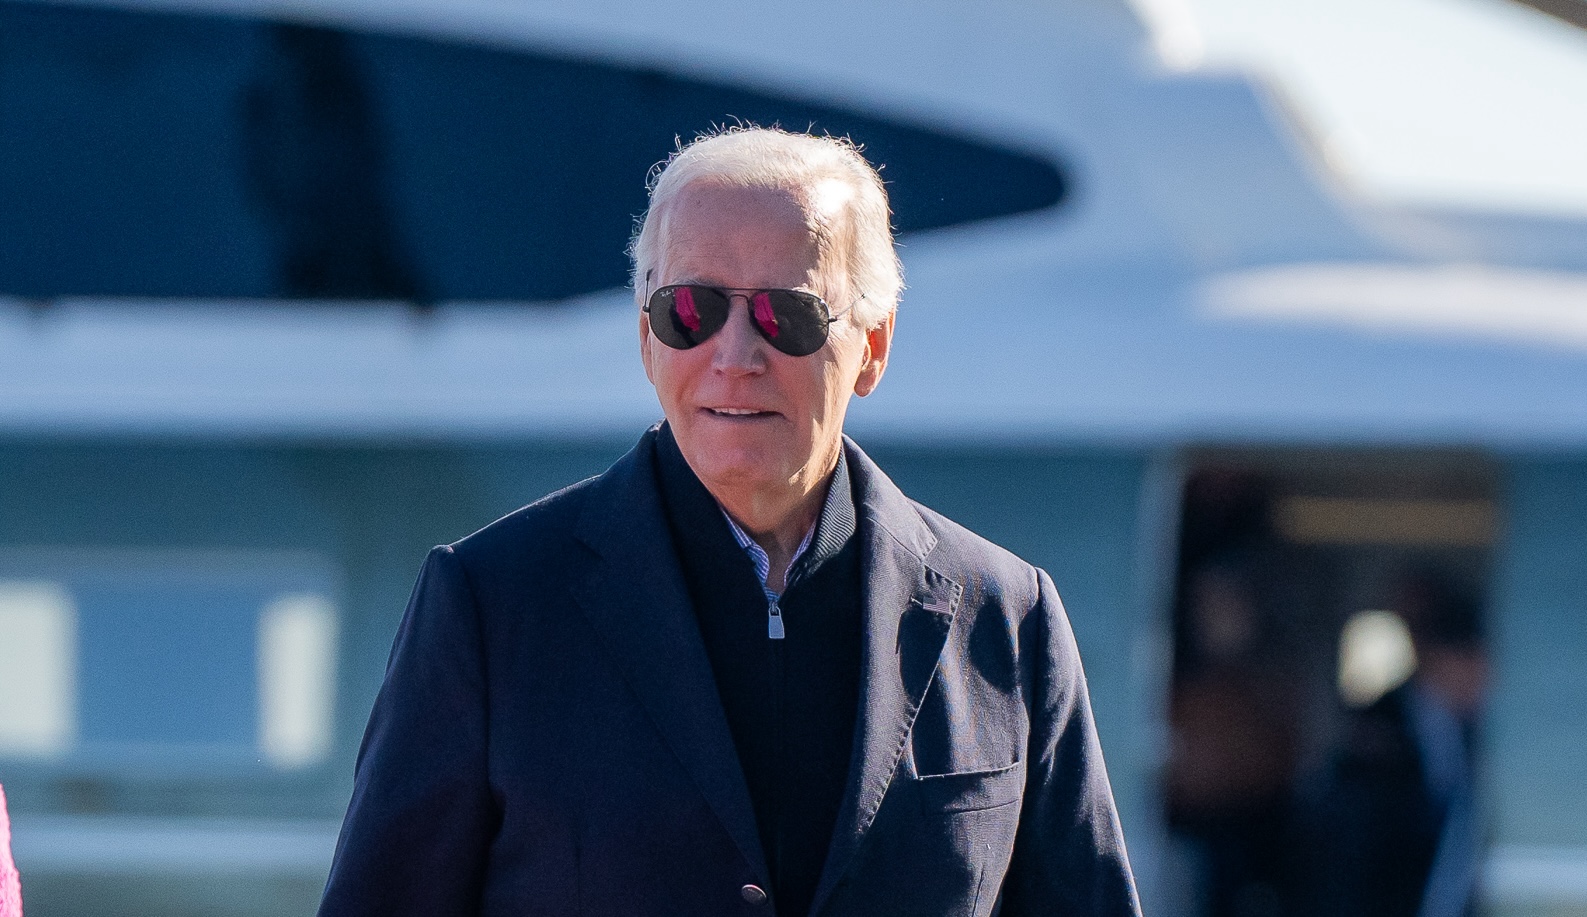 Democrats use Weiss’s latest indictment as a new Russia hoax to protect Biden in 2024